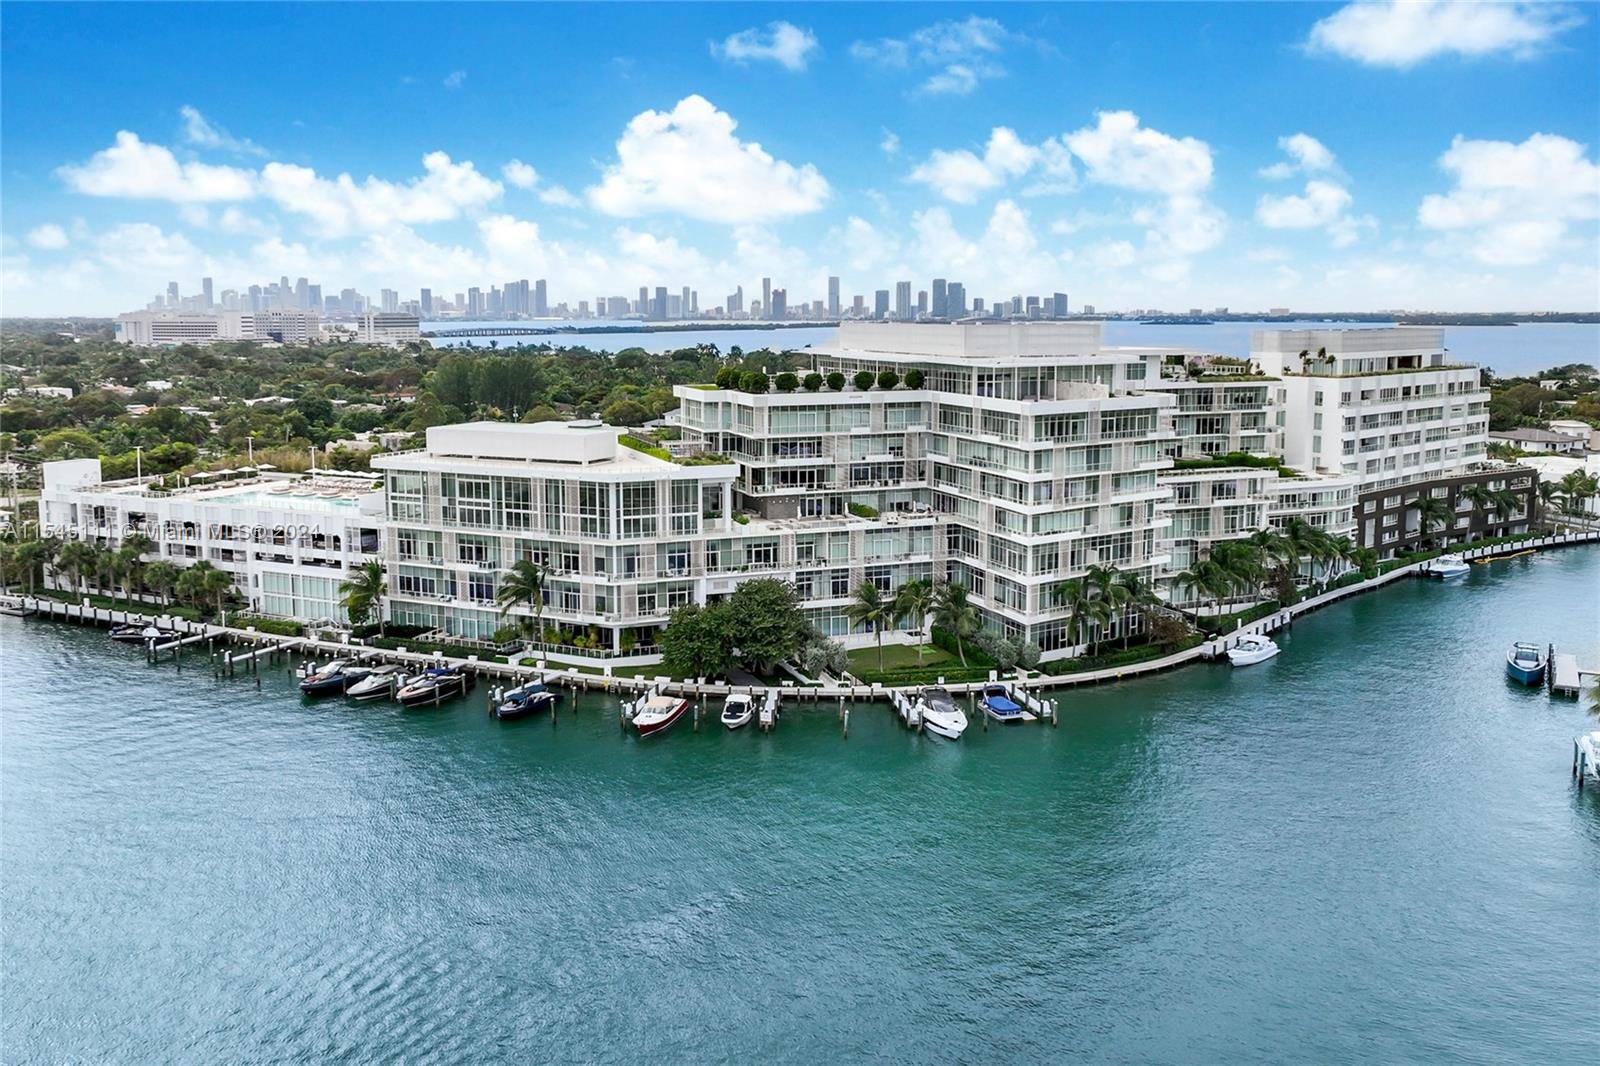 The Ritz Carlton Residences Miami Beach is situated on a prime waterfront location along Surprise Lake and Waterway designed by renowned Italian architect Piero Lissoni.